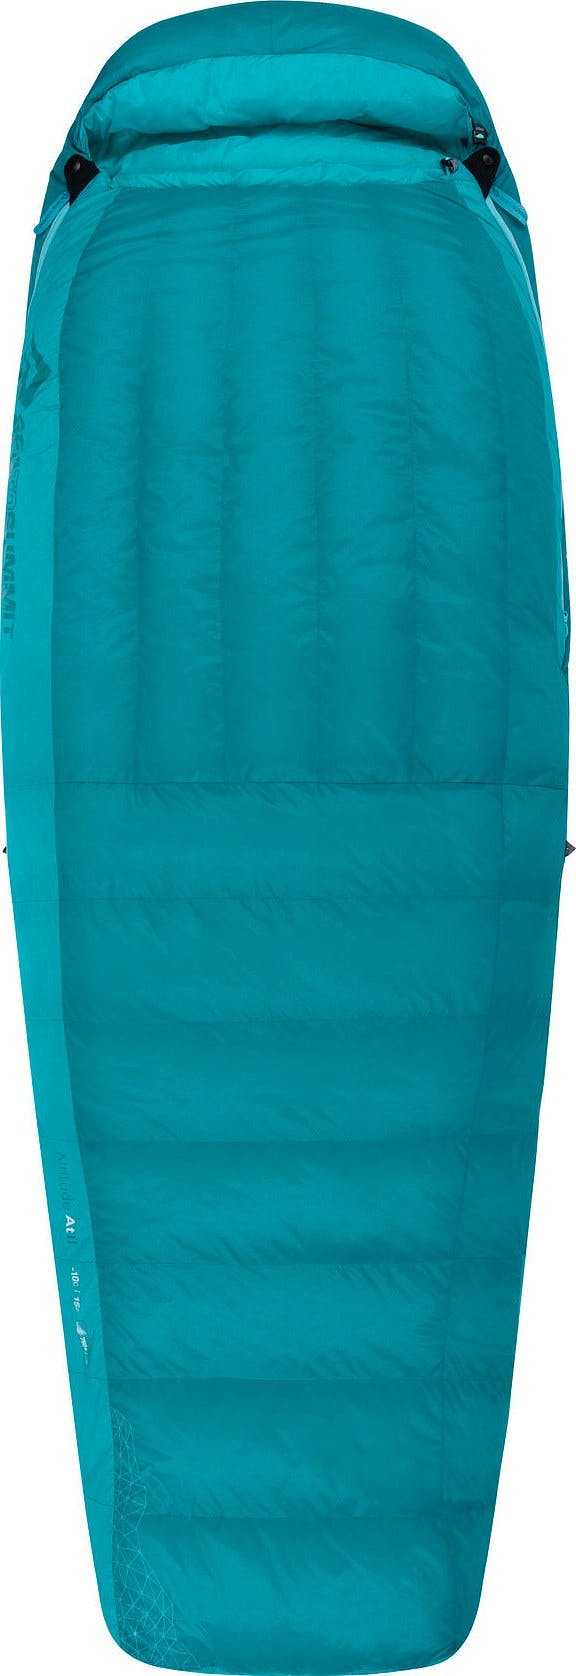 Product image for Altitude AtII Long Sleeping Bag - 15°F/-10°C - Women's